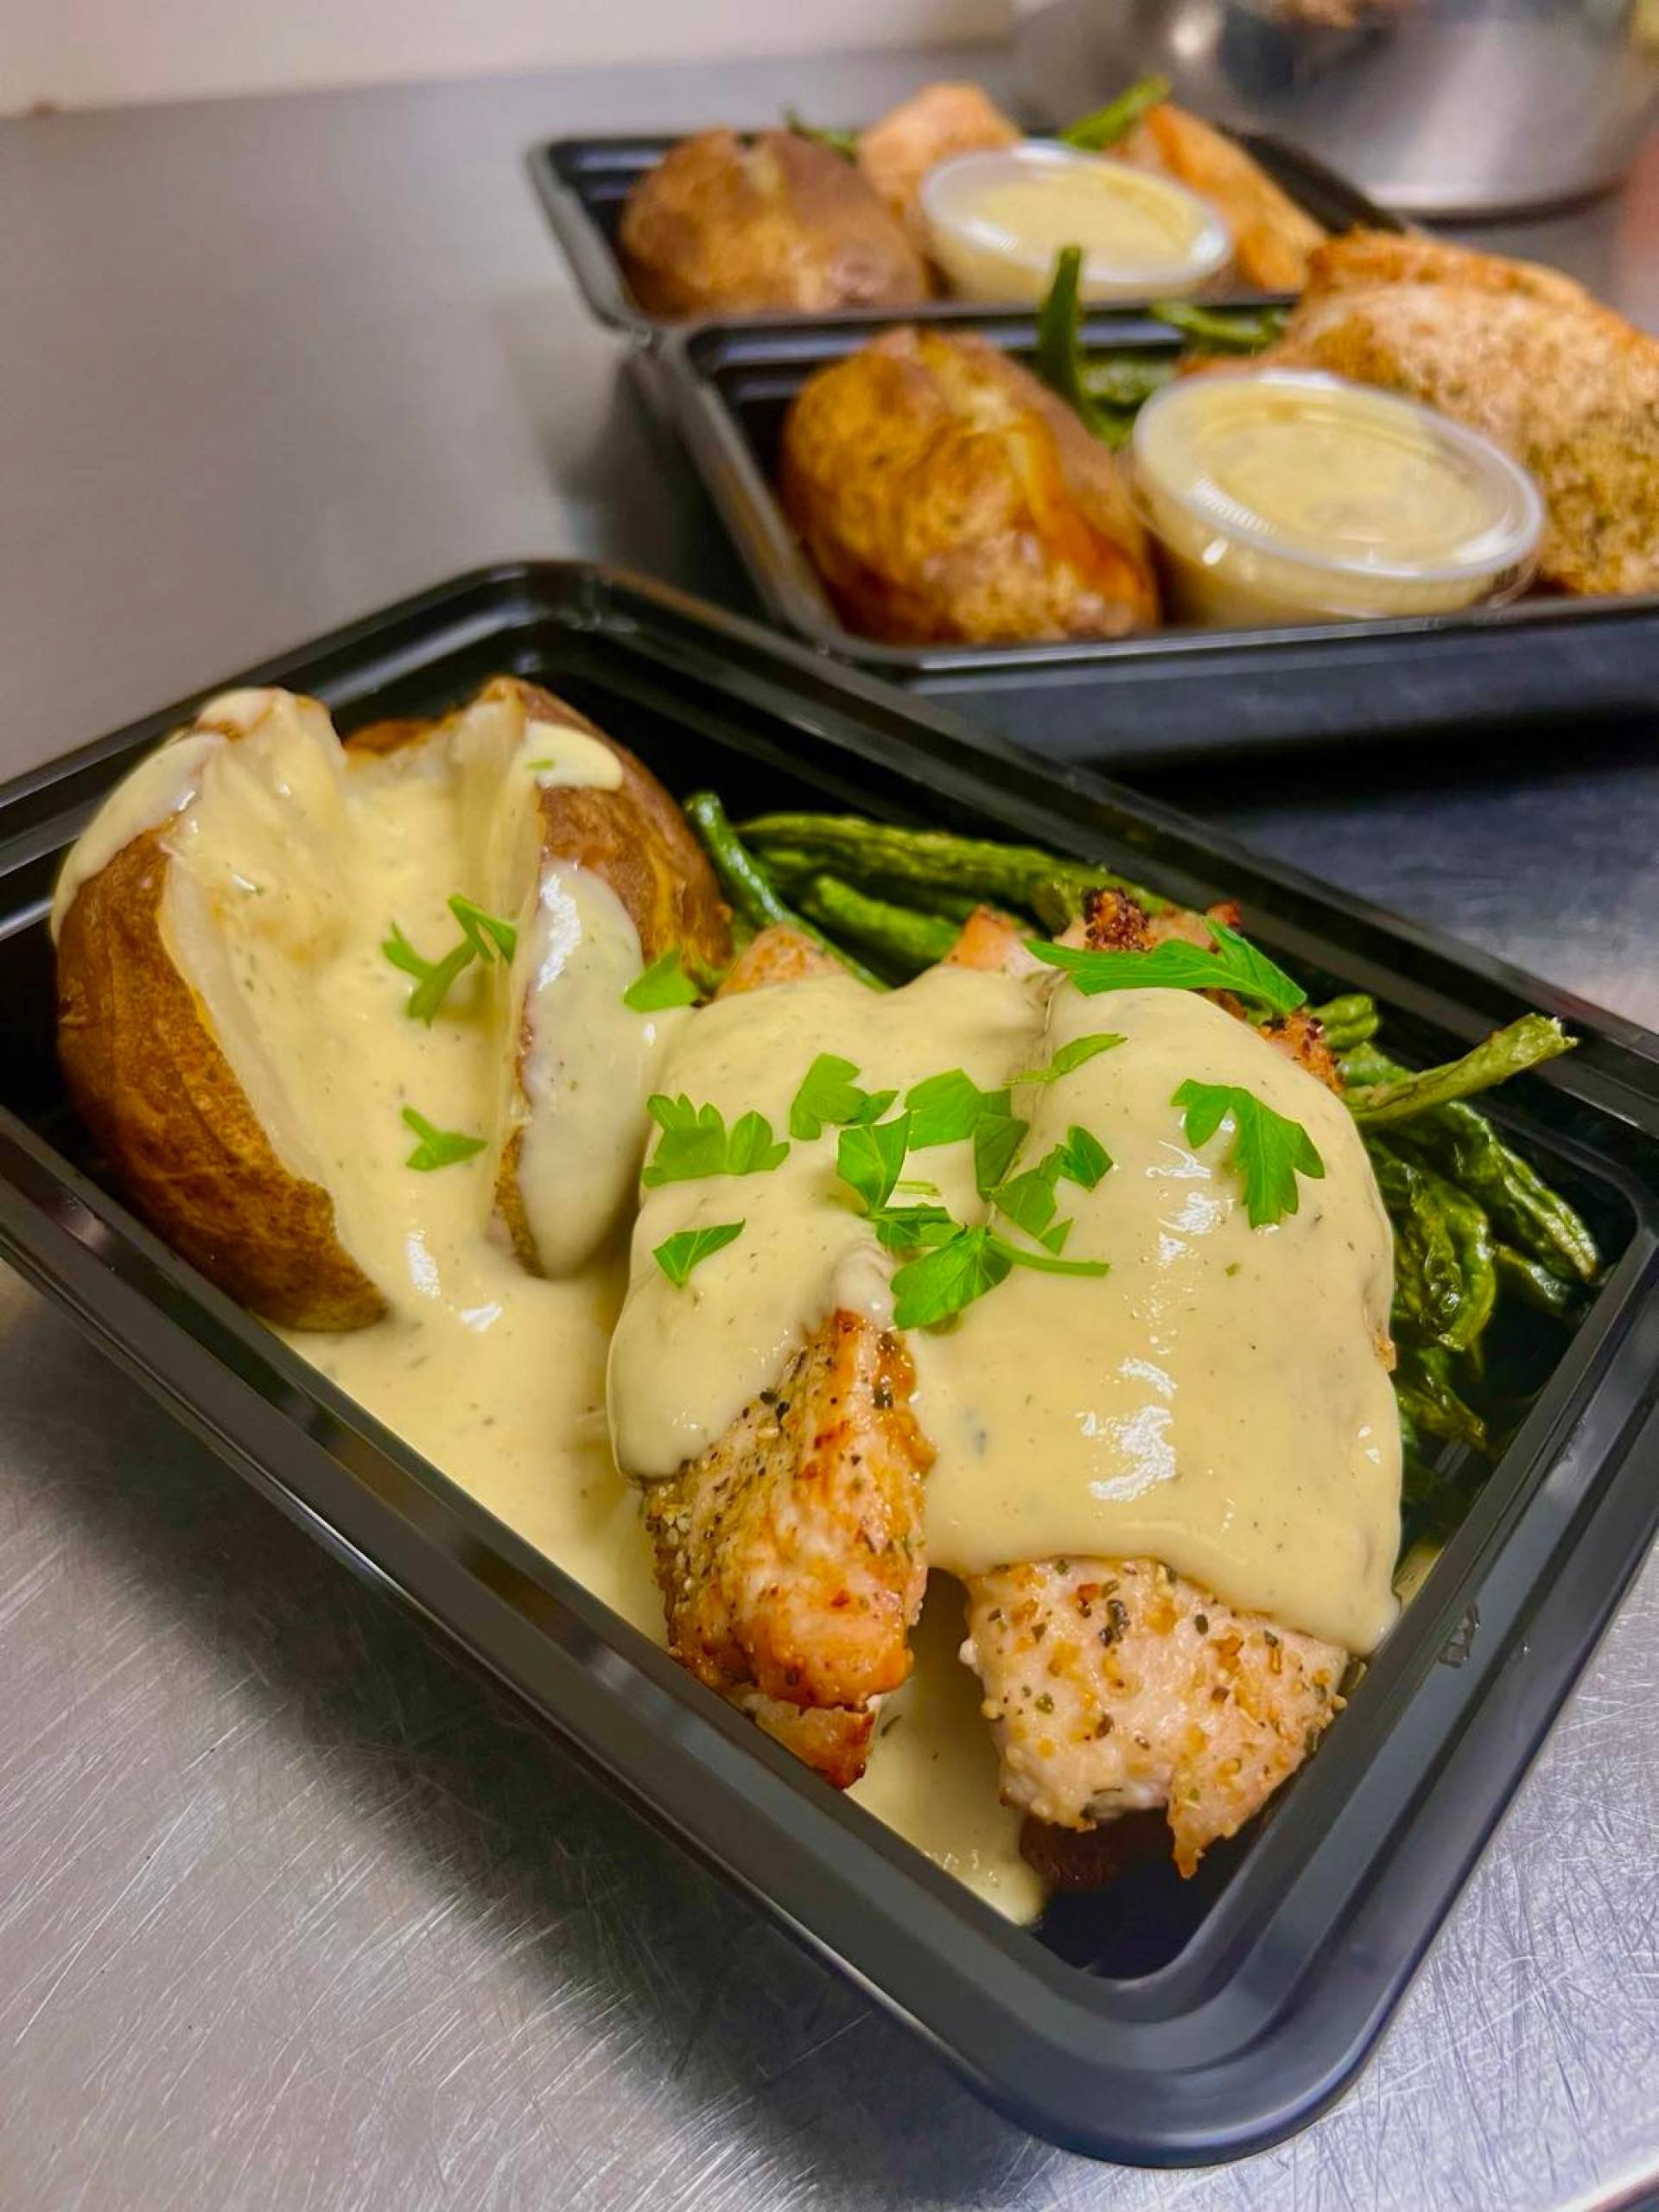 Creamy Ranch Chicken with Green Beans and Baked Potato